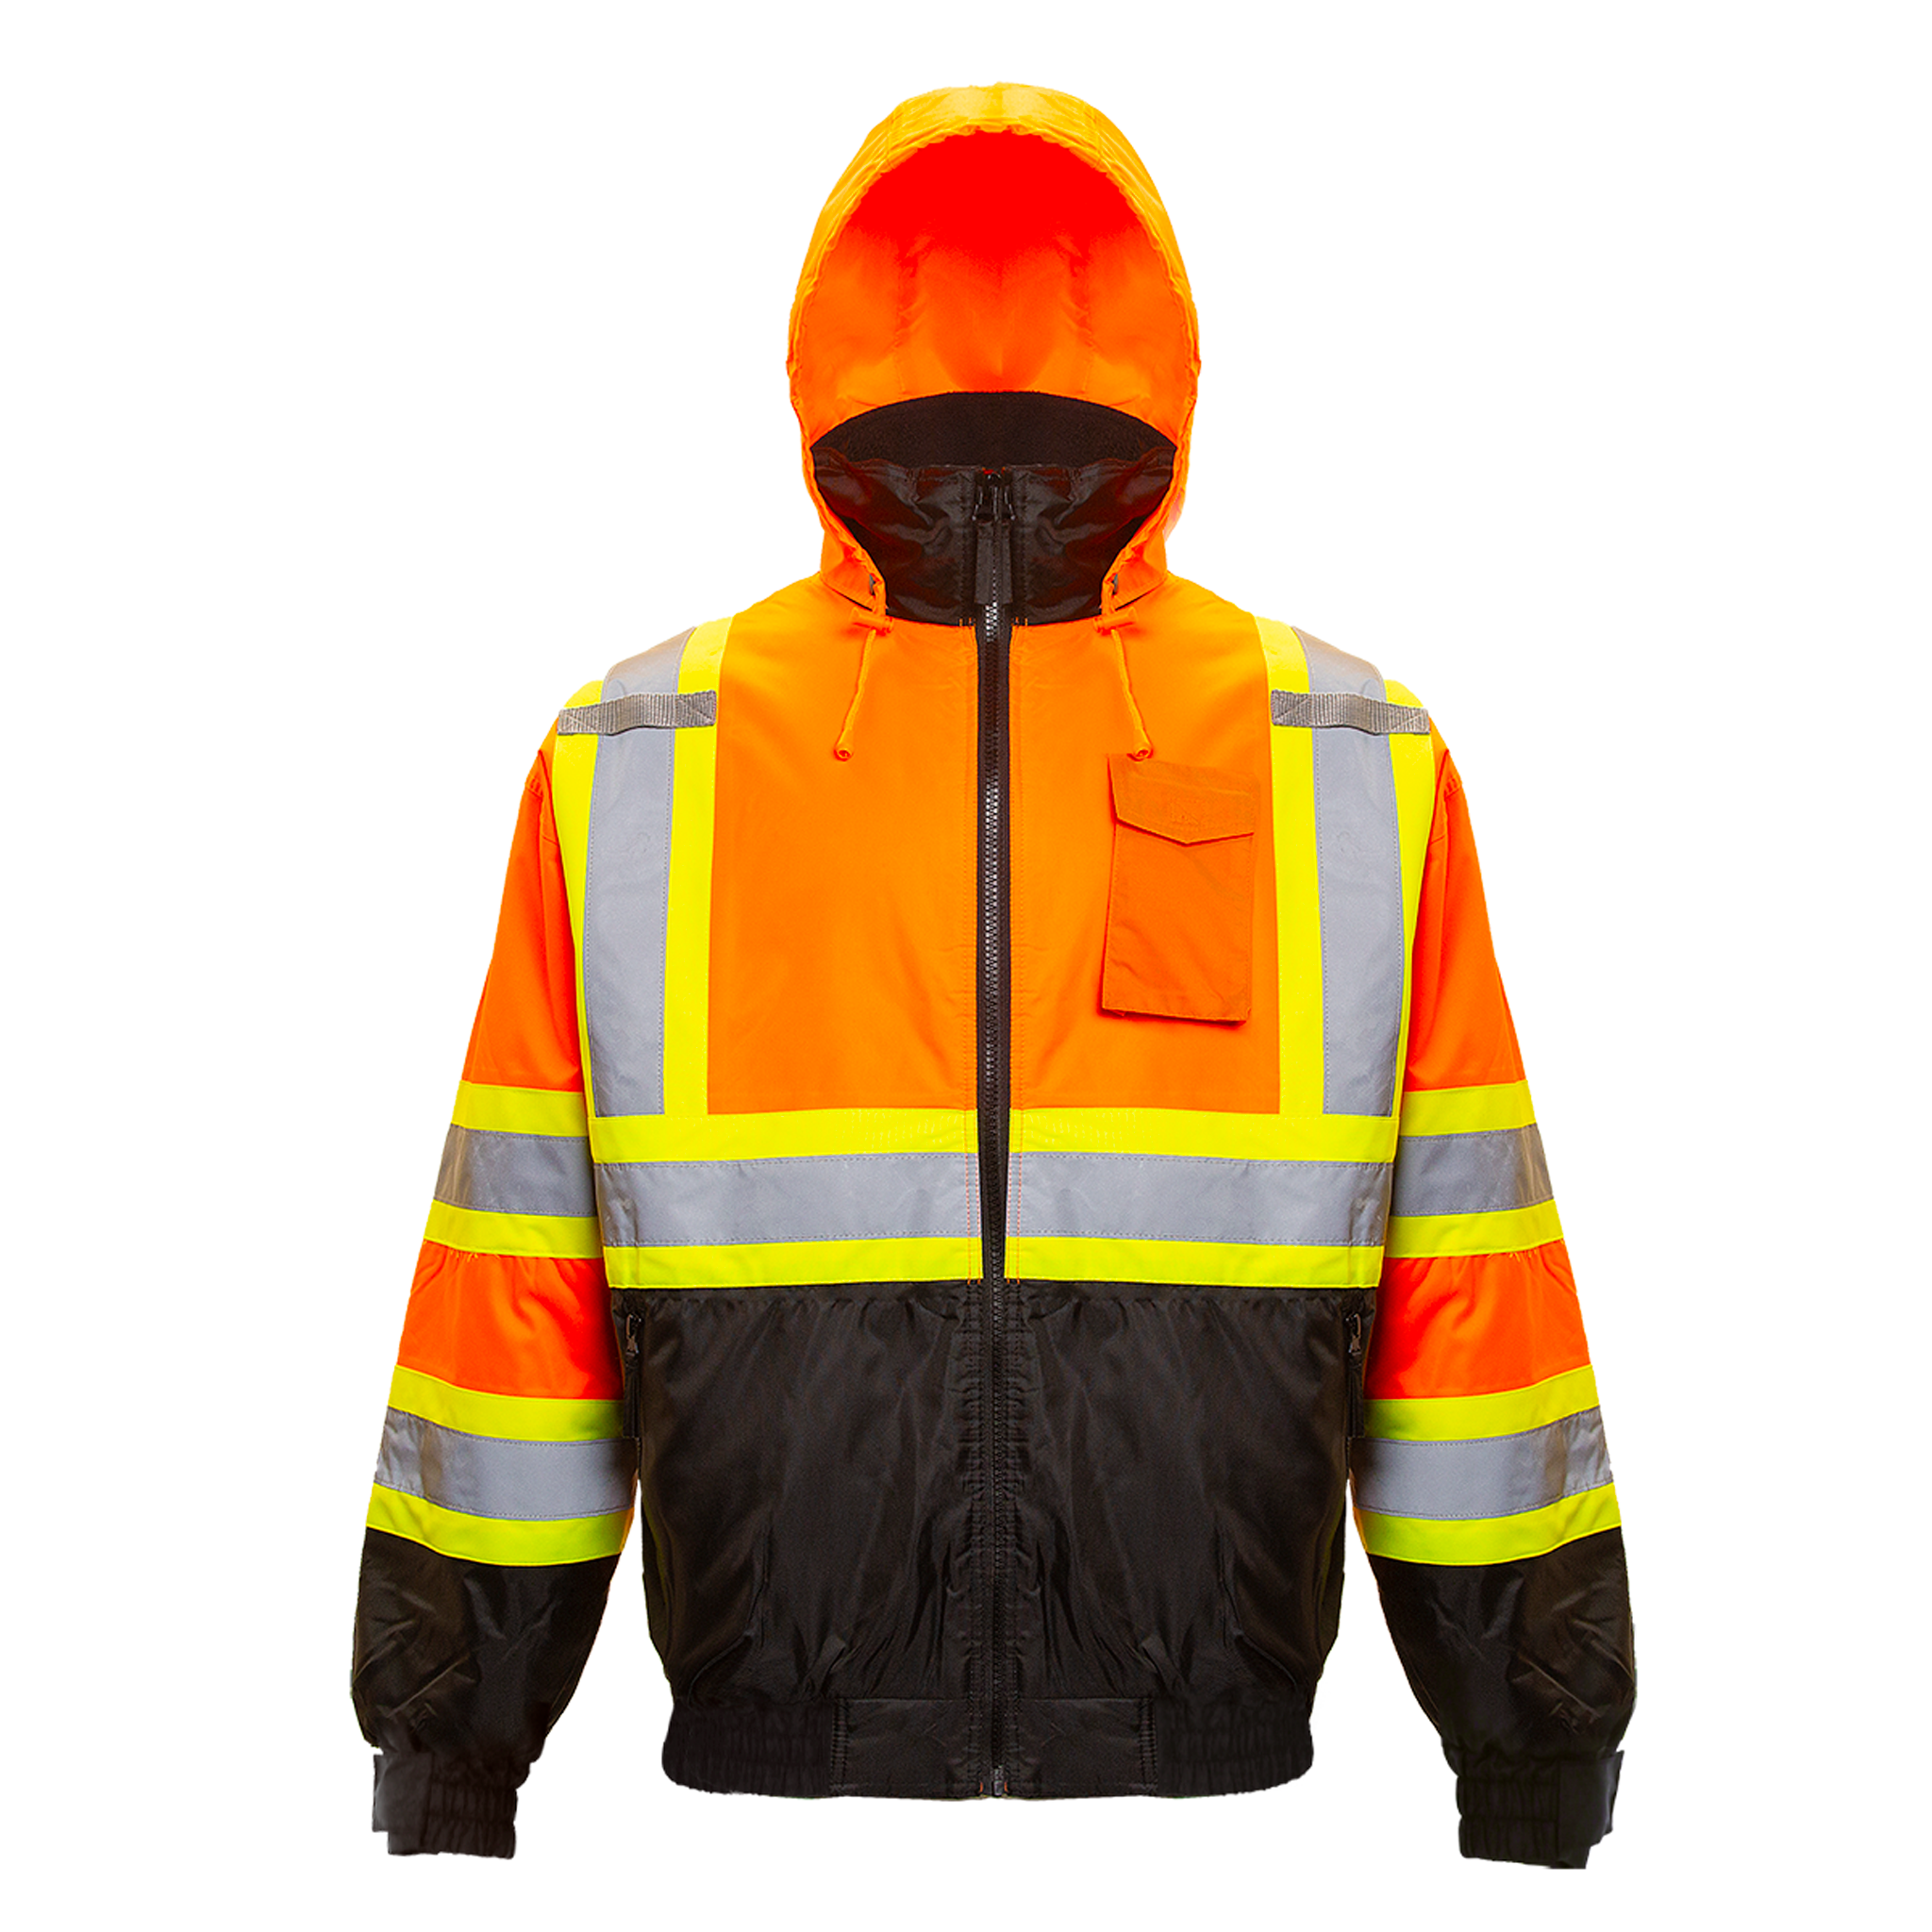 Hi-Vis X-Back Two-Tone Safety Bomber Jacket with Reflective Stripes